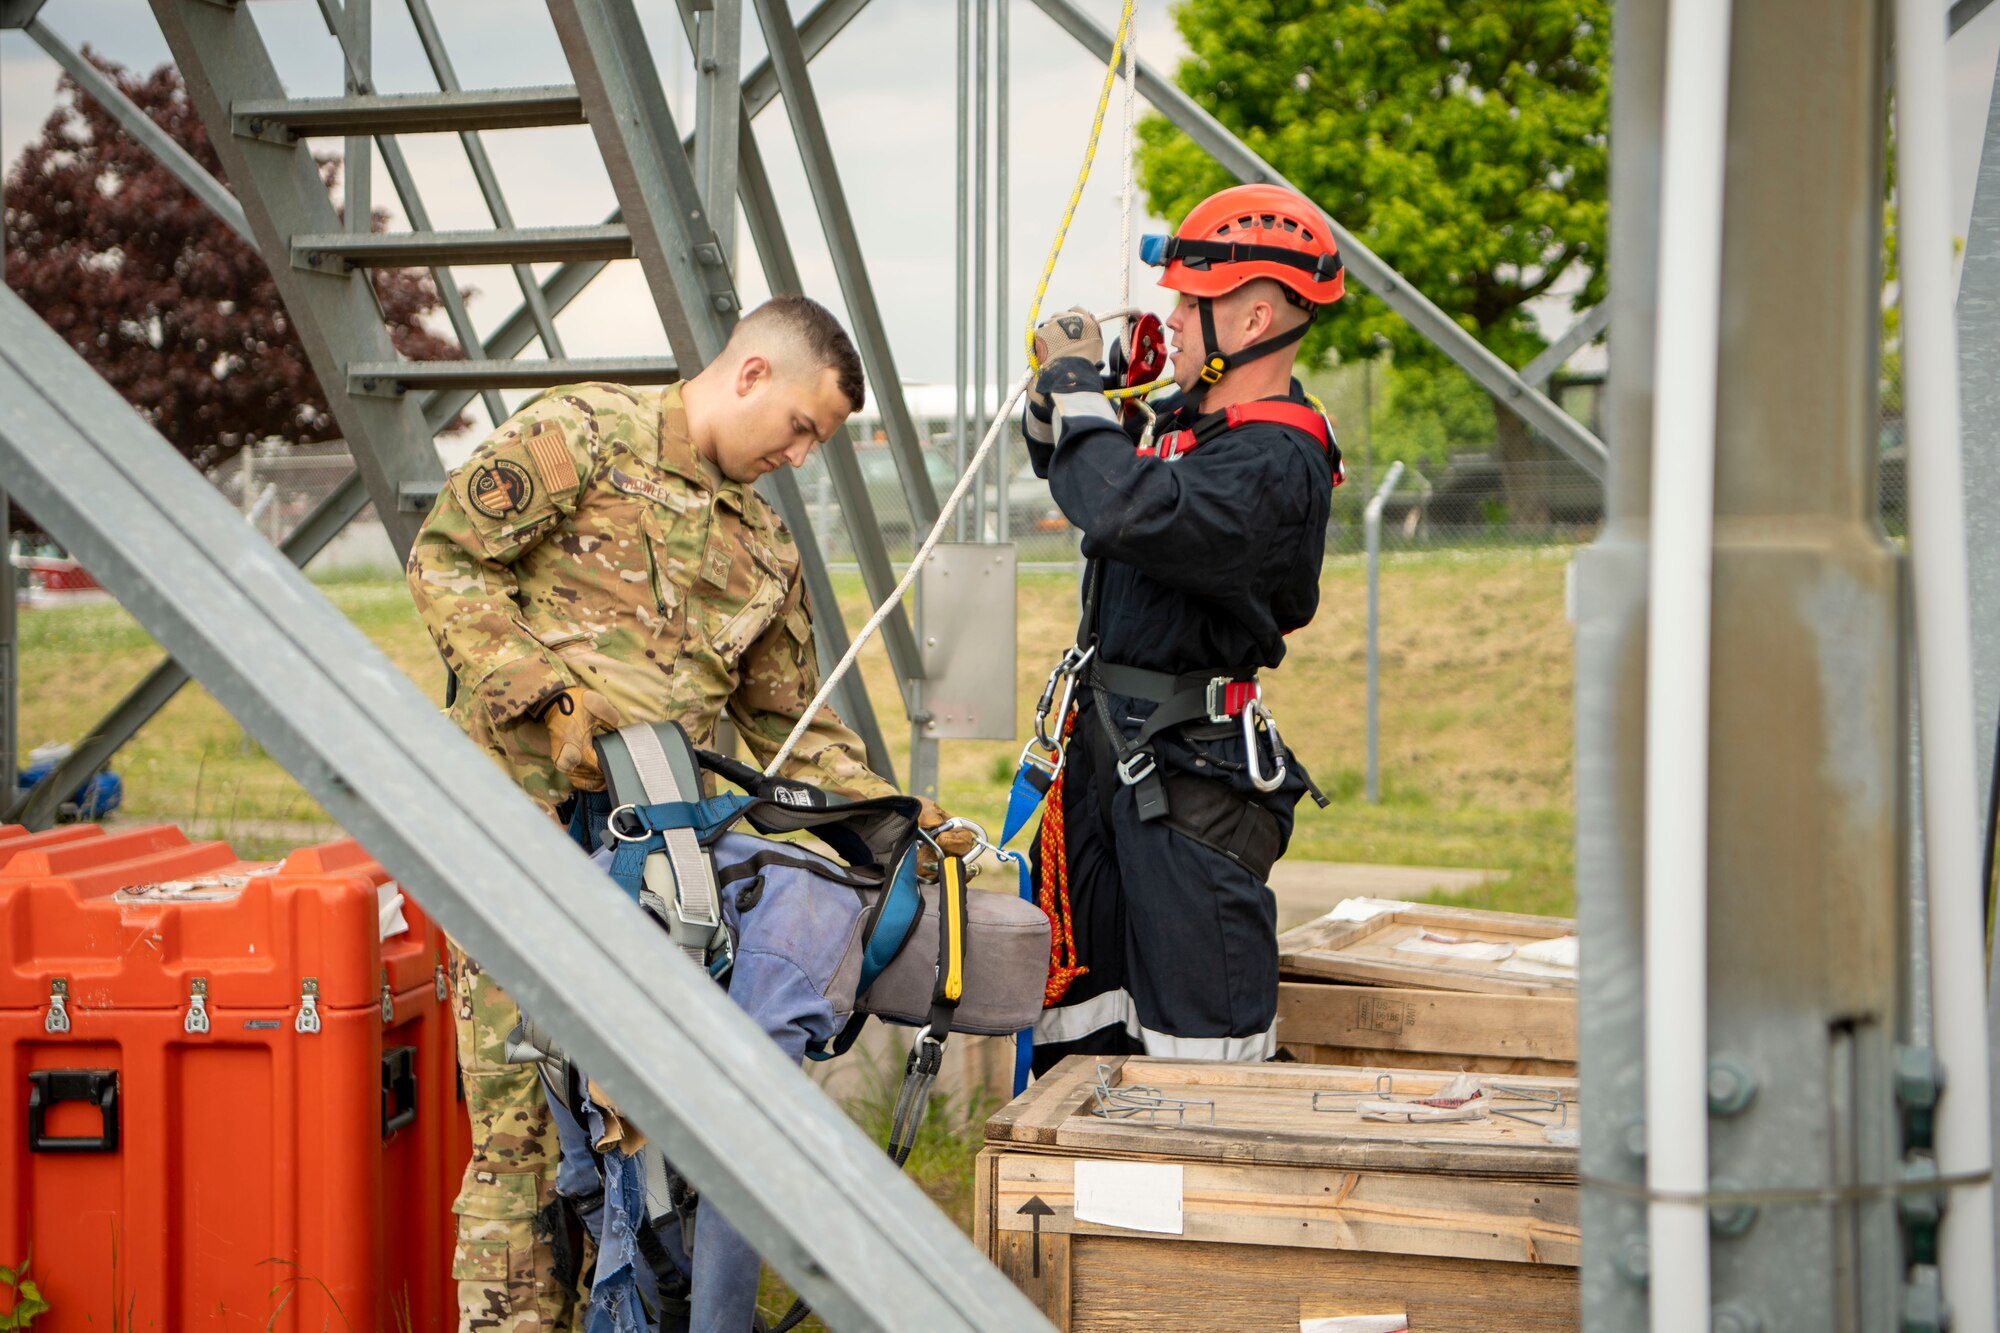 Staff Sgt. Sean Howley, left, 52nd Civil Engineer Squadron non-commissioned officer in charge of fire prevention, and Airman 1st Class Isaac Painter, 52nd CES firefighter, rescue a rescue dummy, May 4, 2022, on Spangdahlem Air Base, Germany. The 52nd Fighter Wing Safety office hosted a Fall Rescue demonstration at the radar tower with the 52nd CES fire department. (U.S. Air Force photo by Airman 1st Class Jessica Sanchez-Chen)